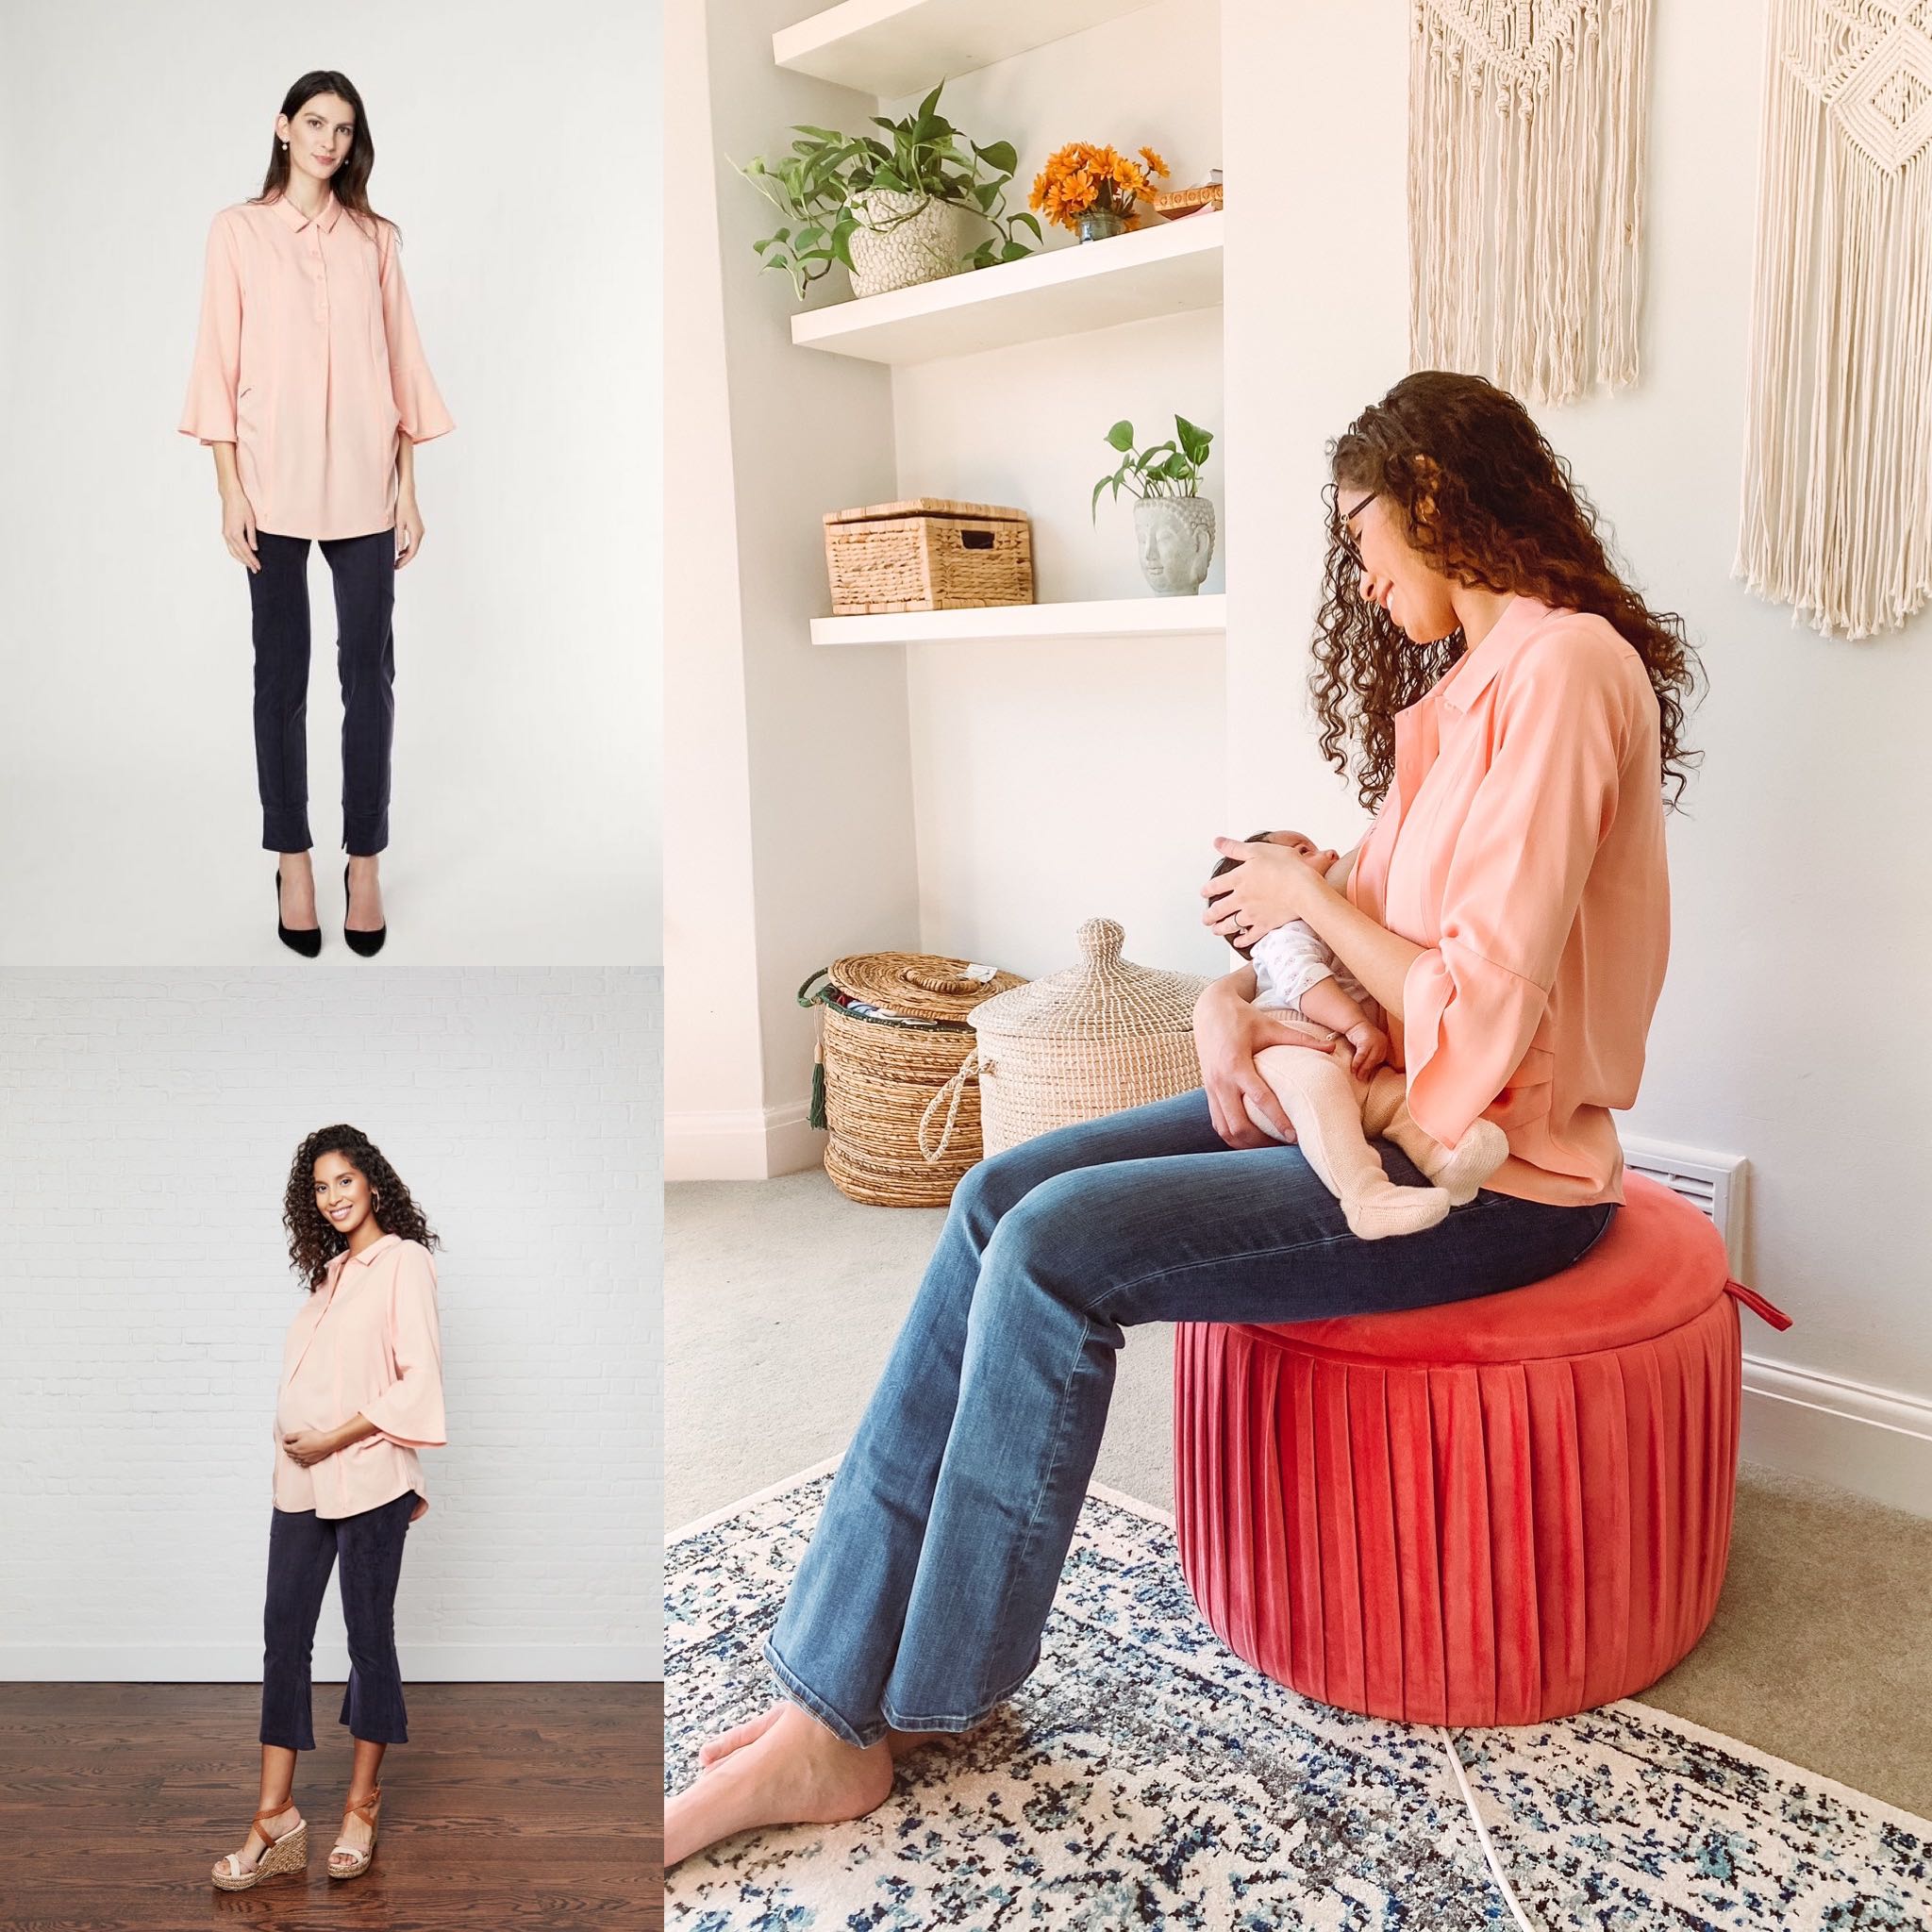 Olivia Shirt: Maternity workwear perfect for pumping and nursing moms [On Sale] $140